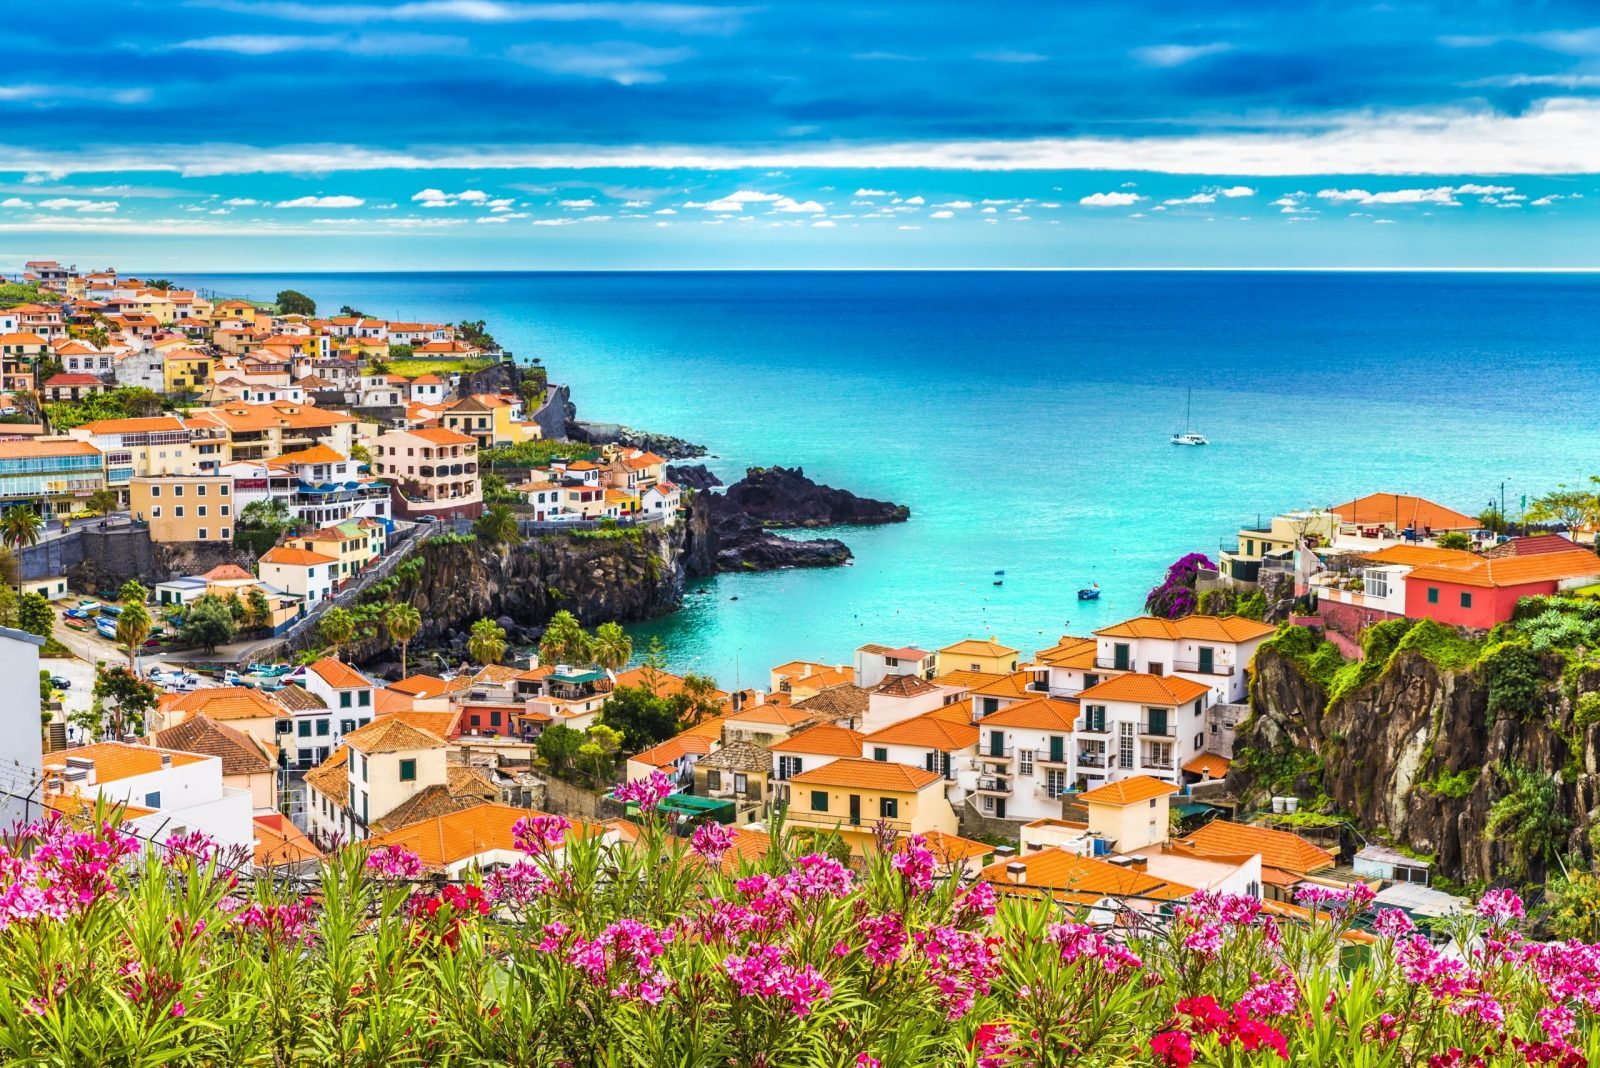 Honestly, It Would Surprise Me If Anyone Can Score 22/30 on This World Capitals Quiz Portugal